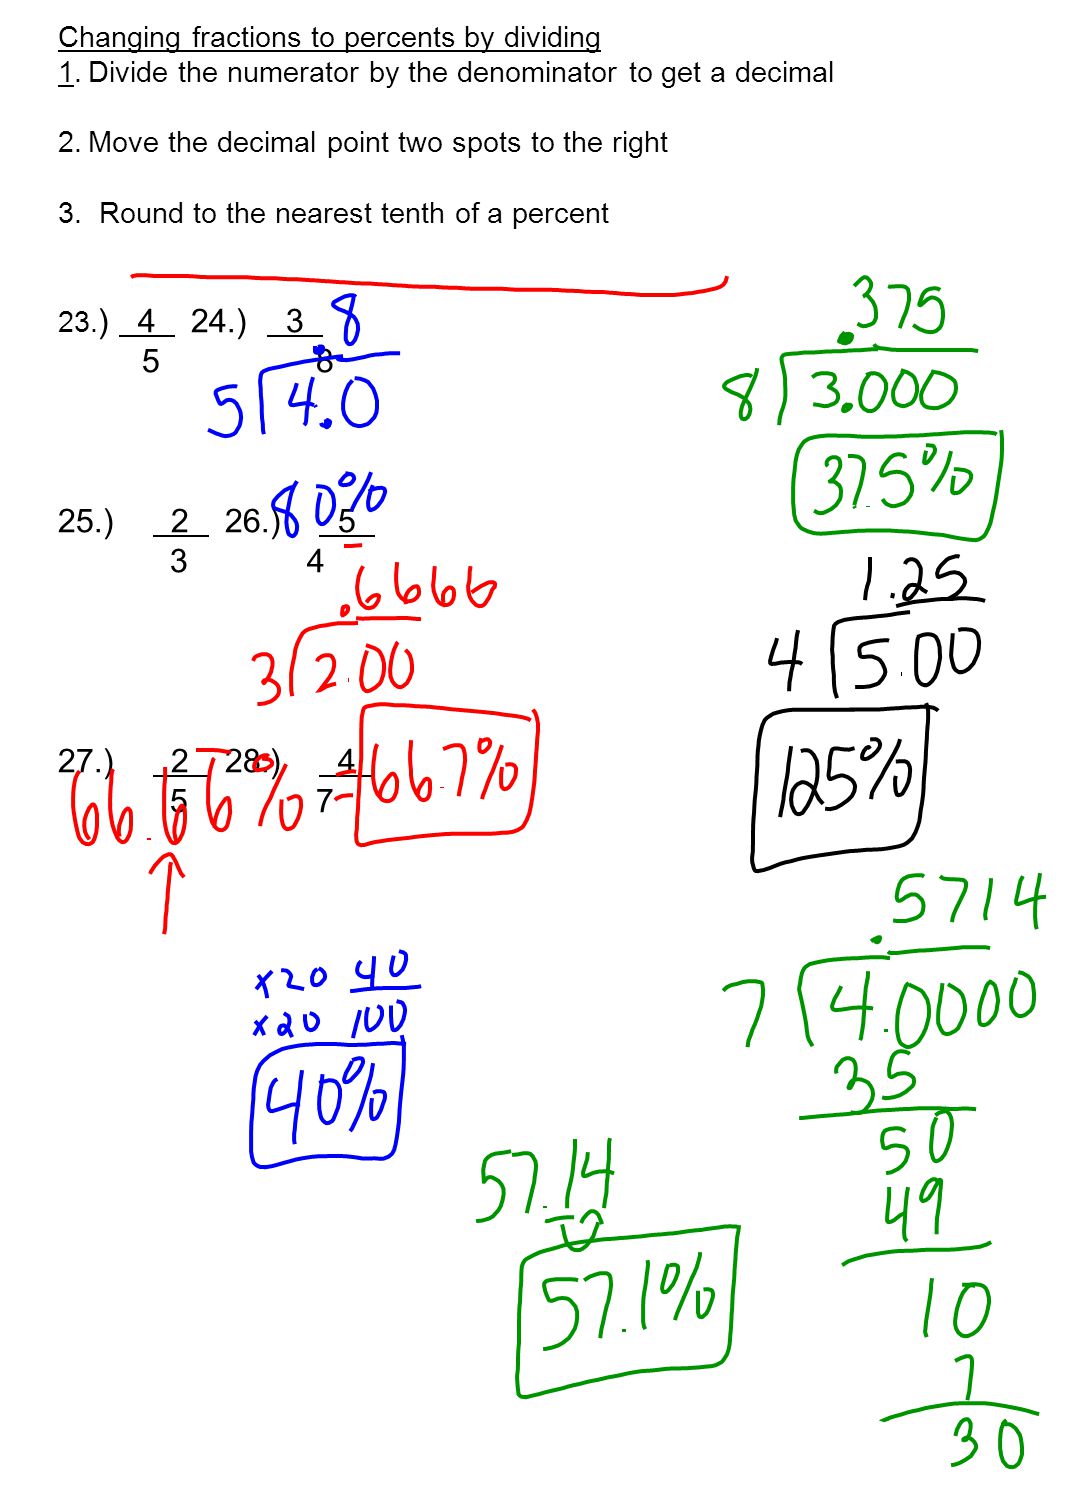 Changing fractions to percents by dividing